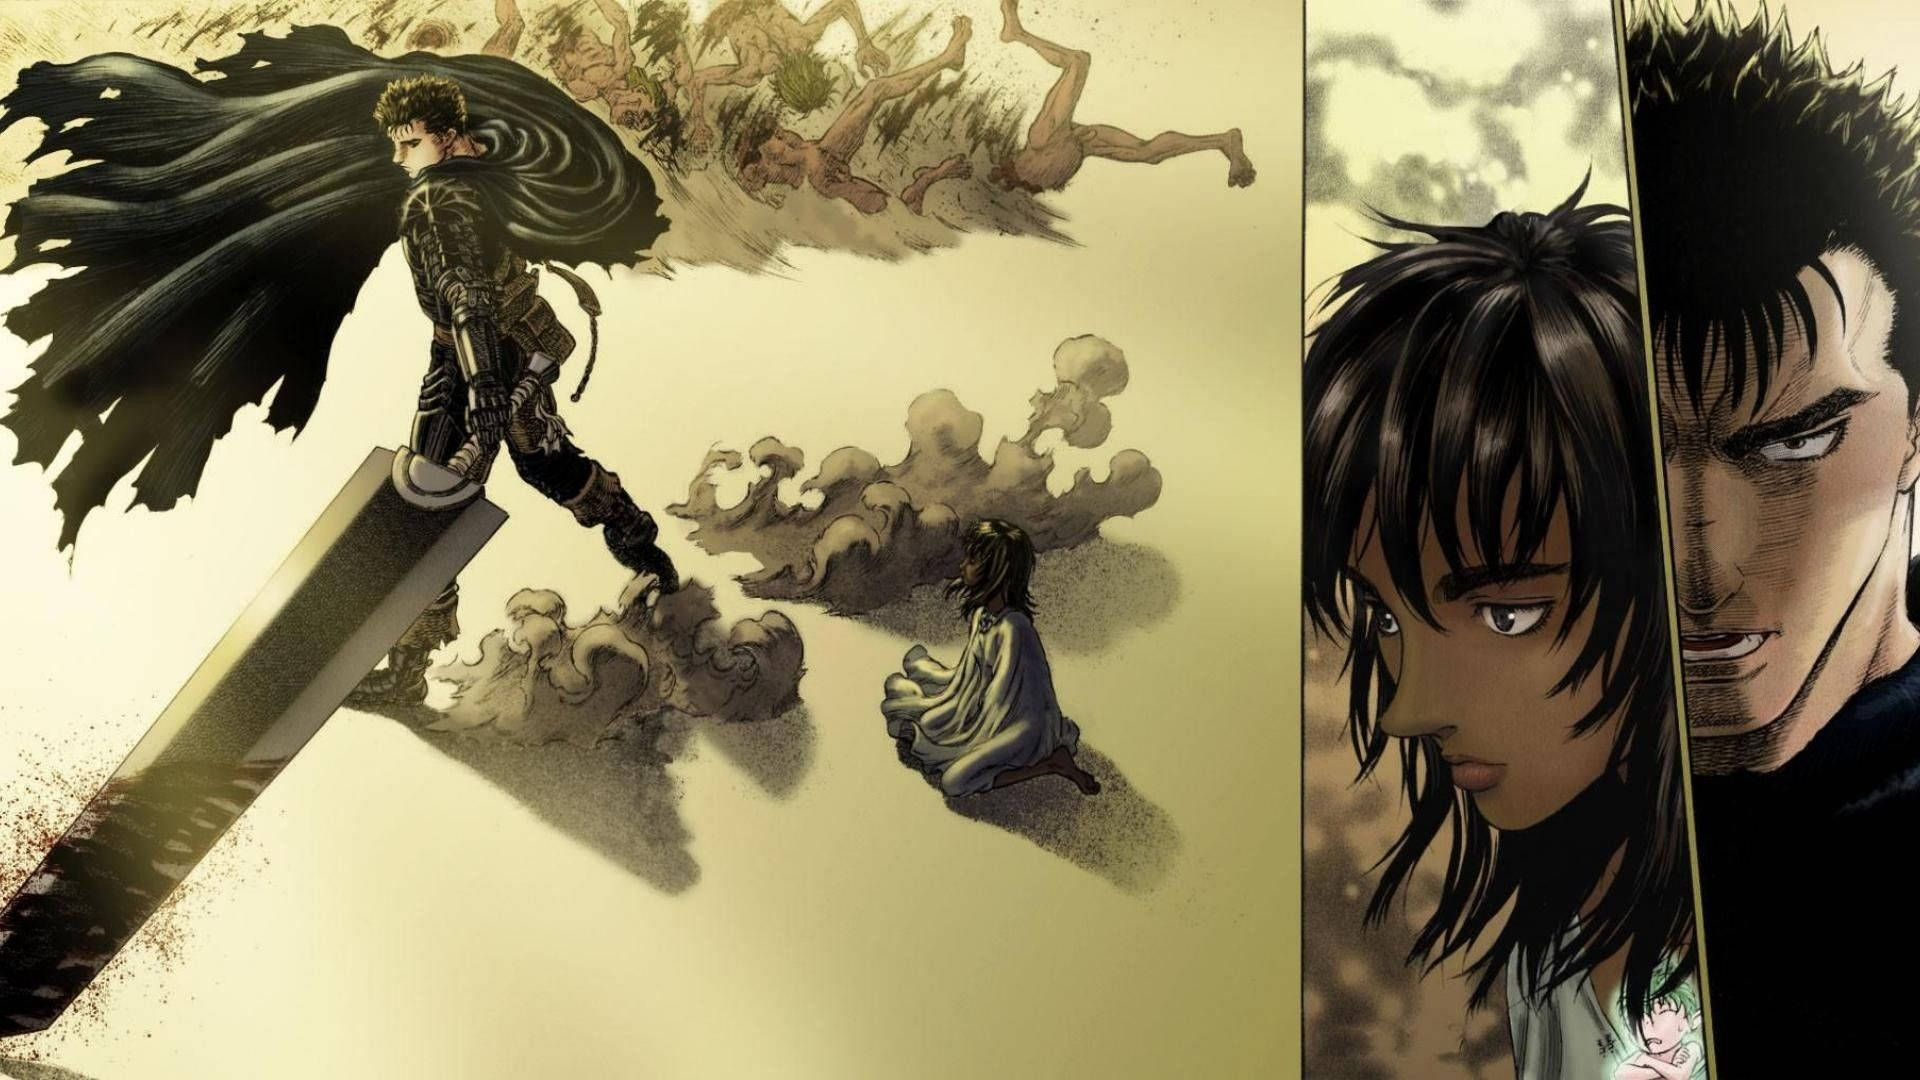 Guts and his love, Casca, in action in the fantasy epic Berserk Wallpaper